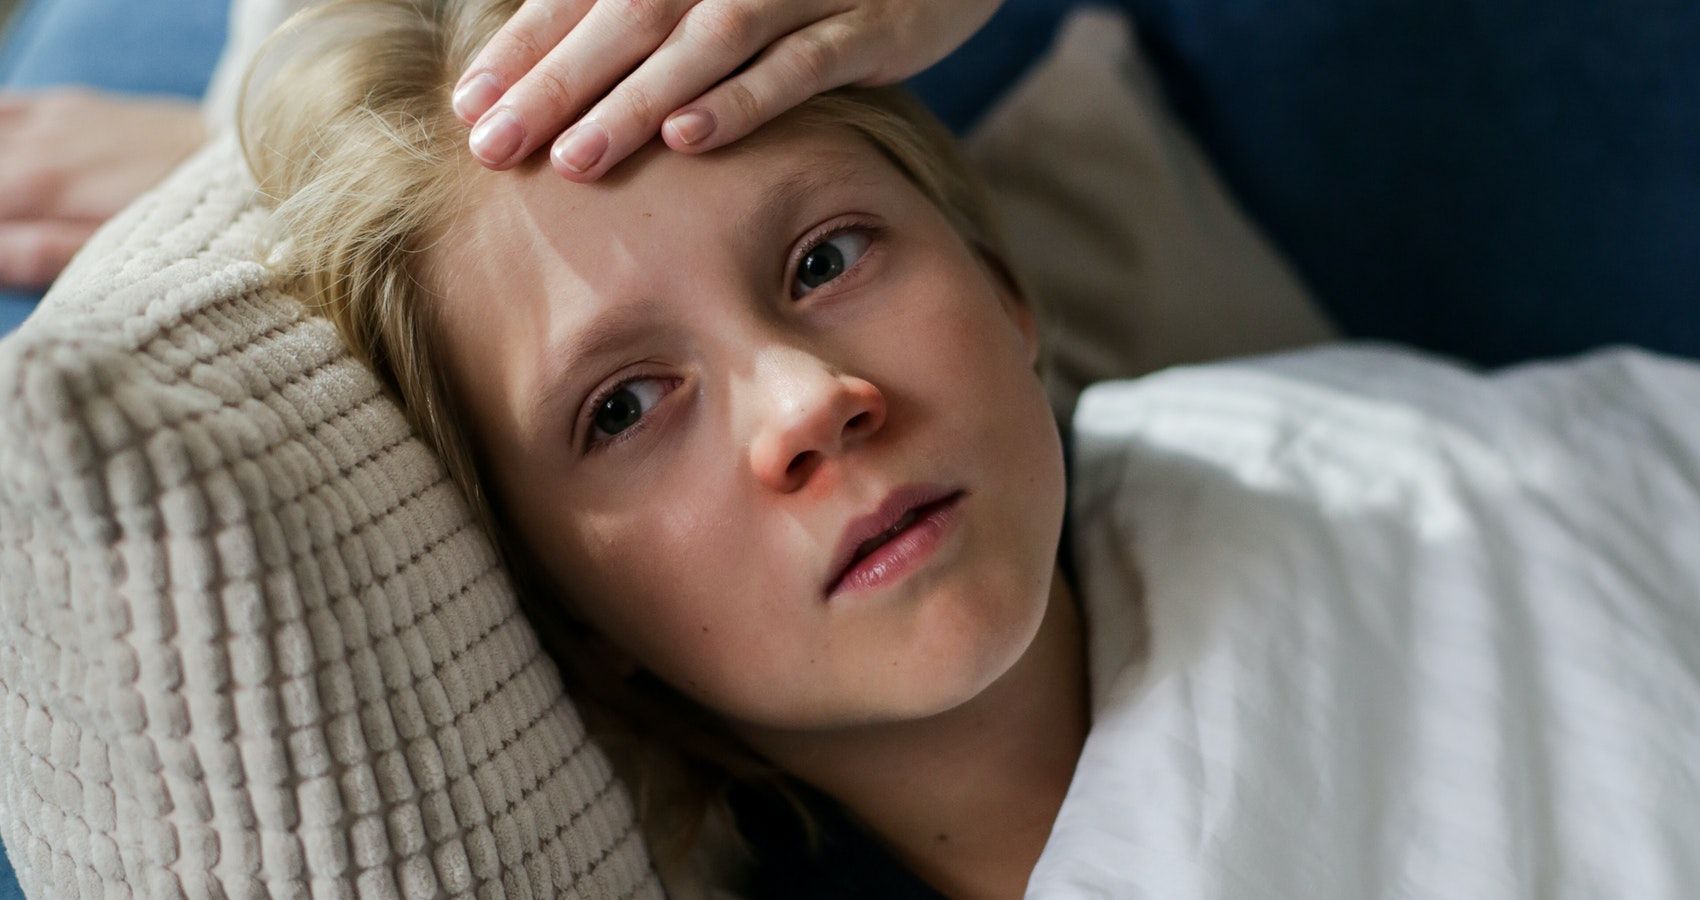 Children’s Immune-Mediated Inflammatory Diseases May Lead To Self-Harm Later On